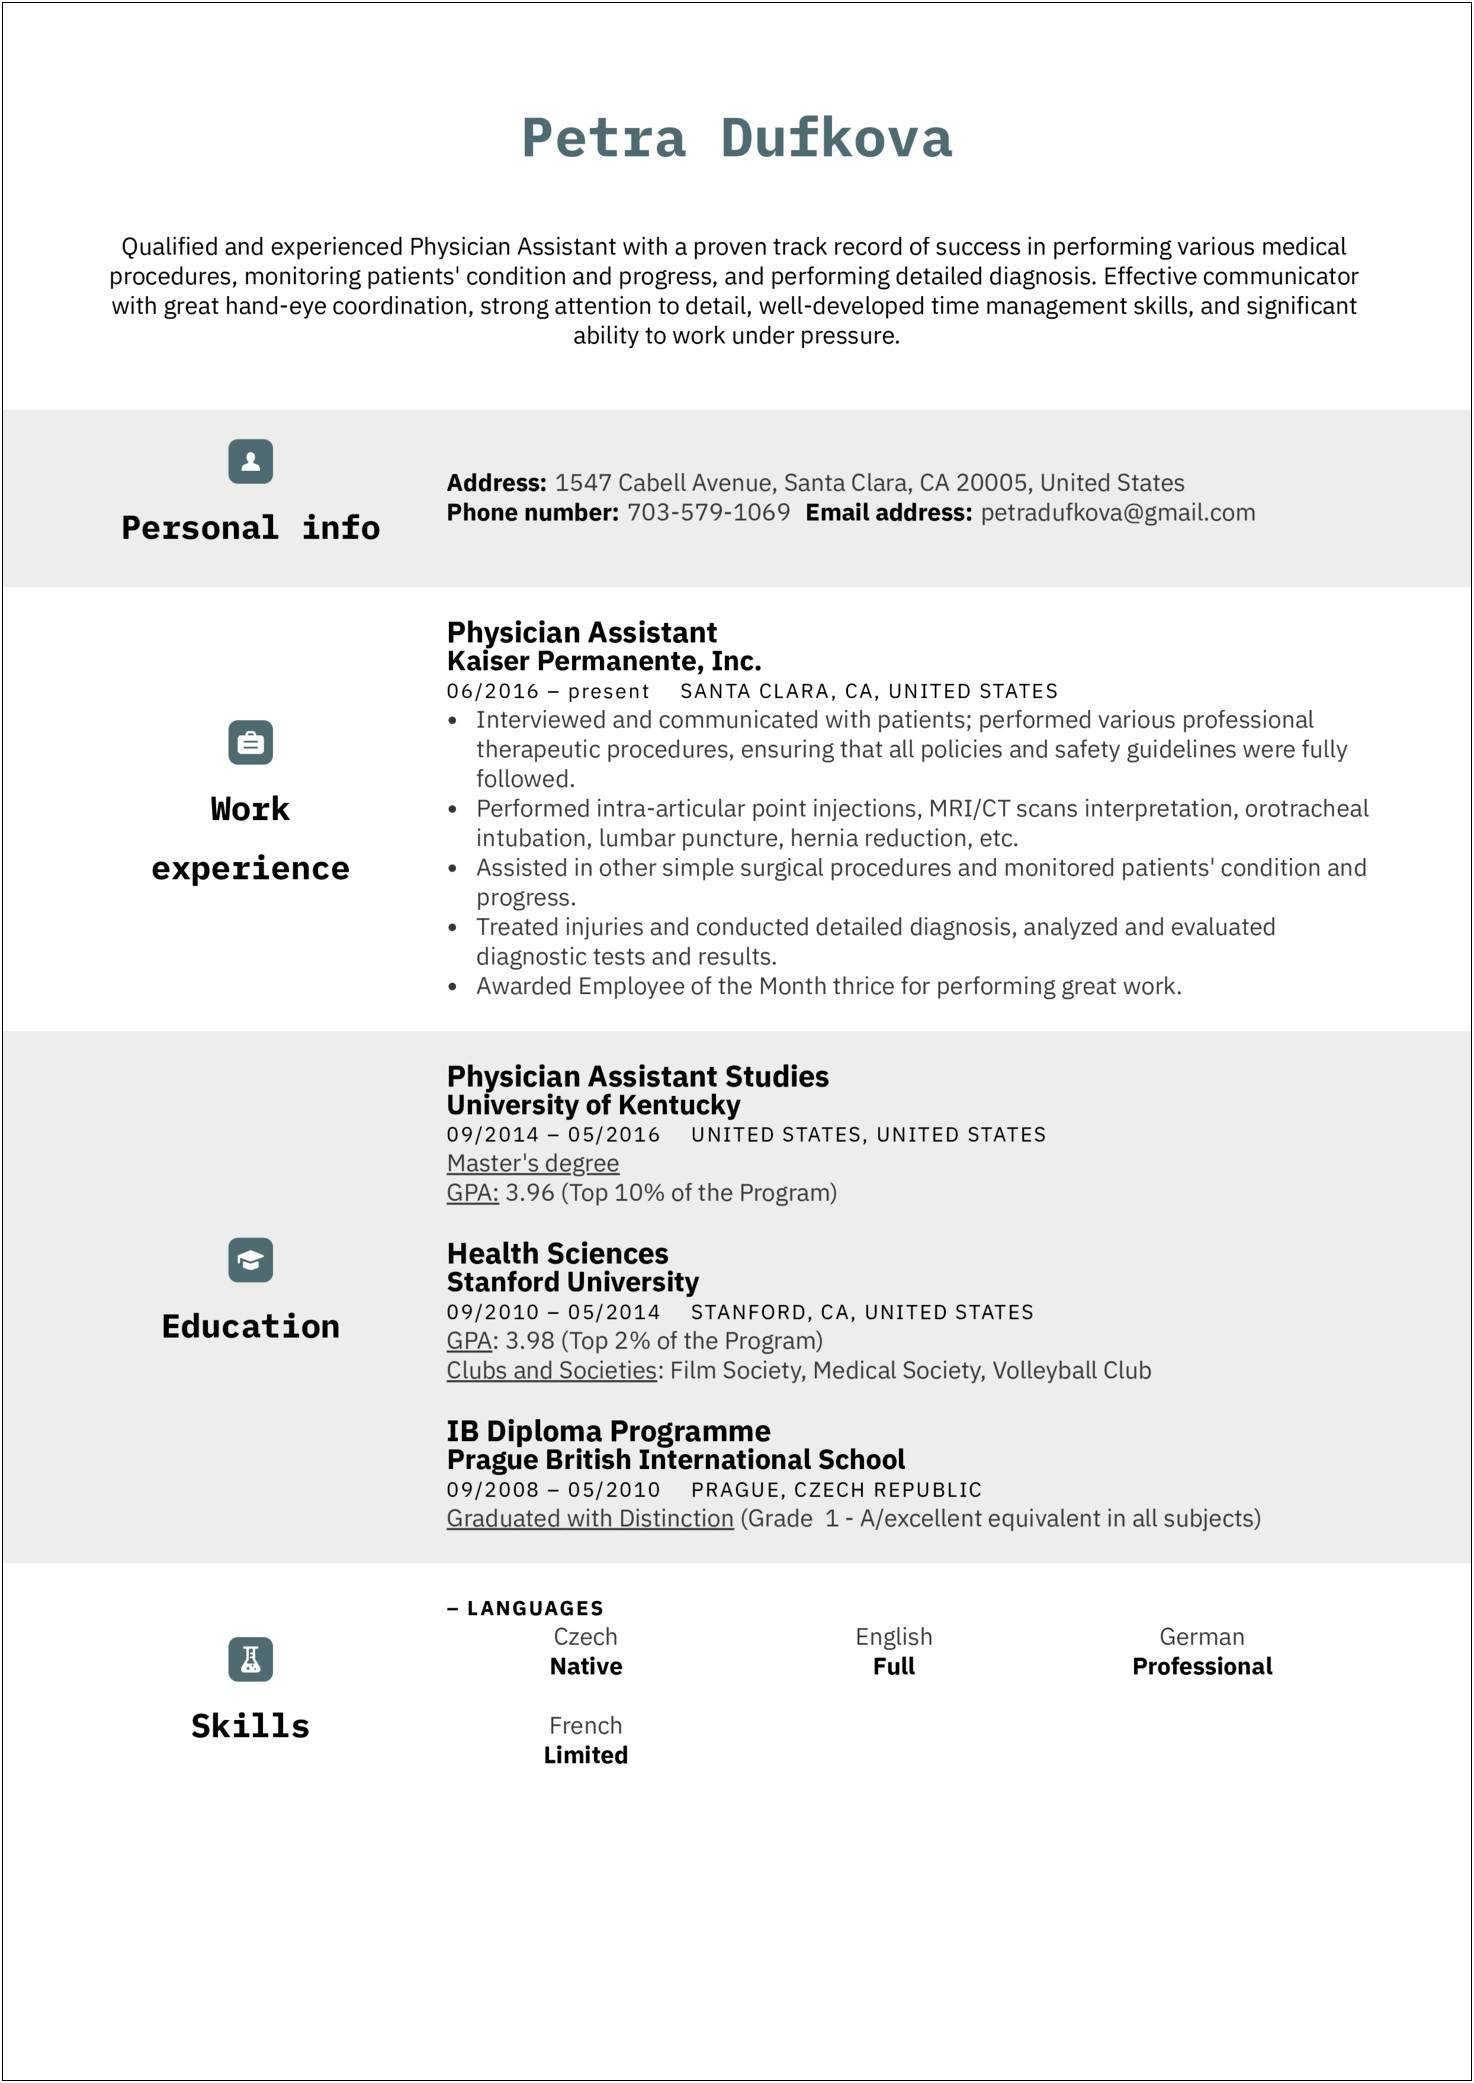 Example Resume For Health Sciences